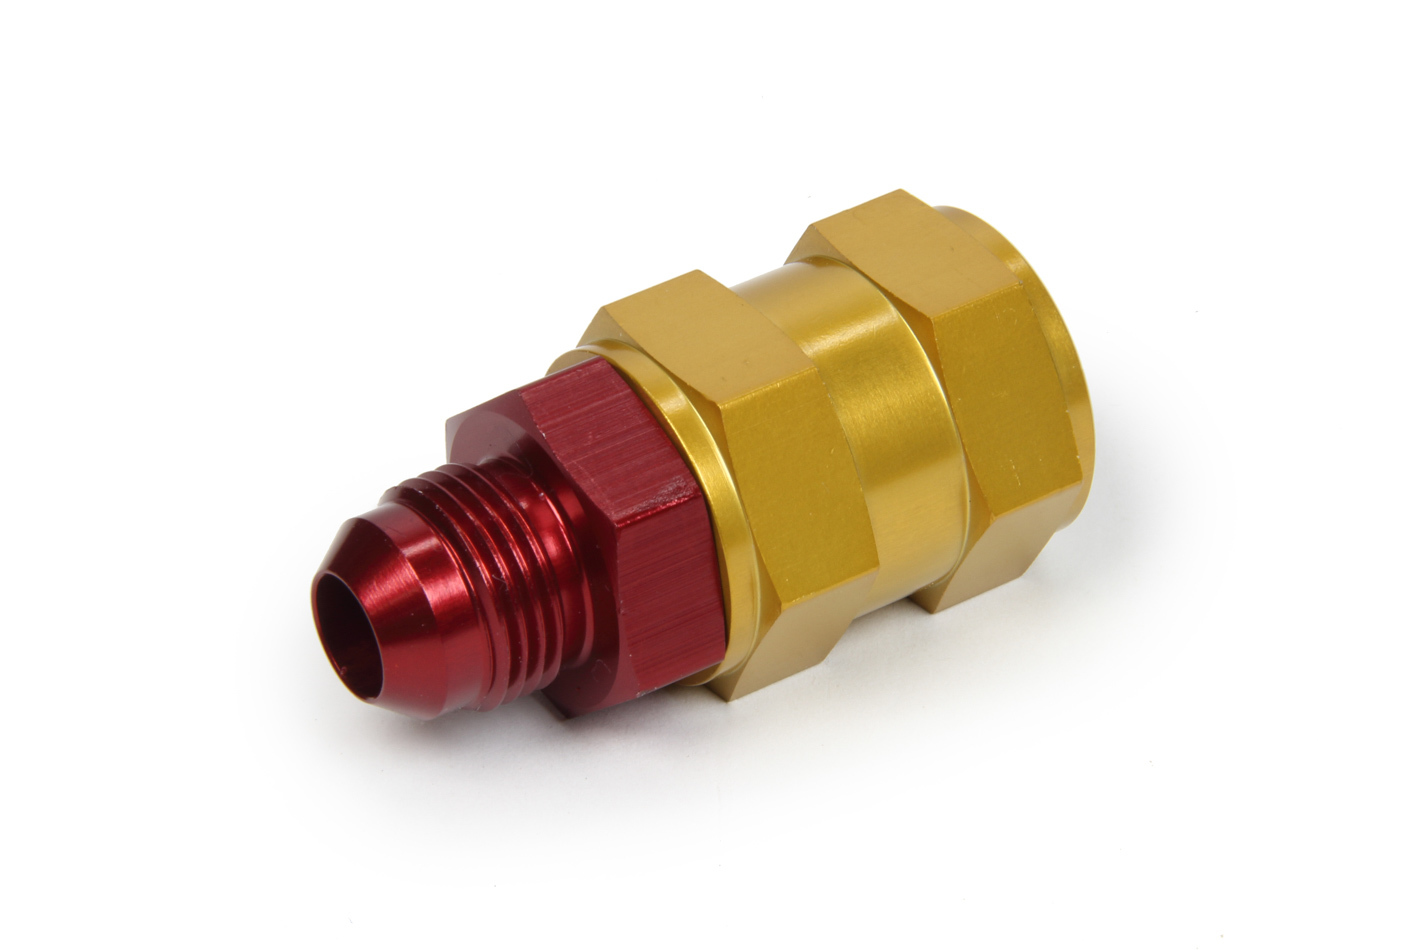 Jaz Products 834-208-06 Roll Over Valve, Vent, External, Check Valve, 8 AN Male Inlet, Brass / Aluminum, Red Anodized, Each